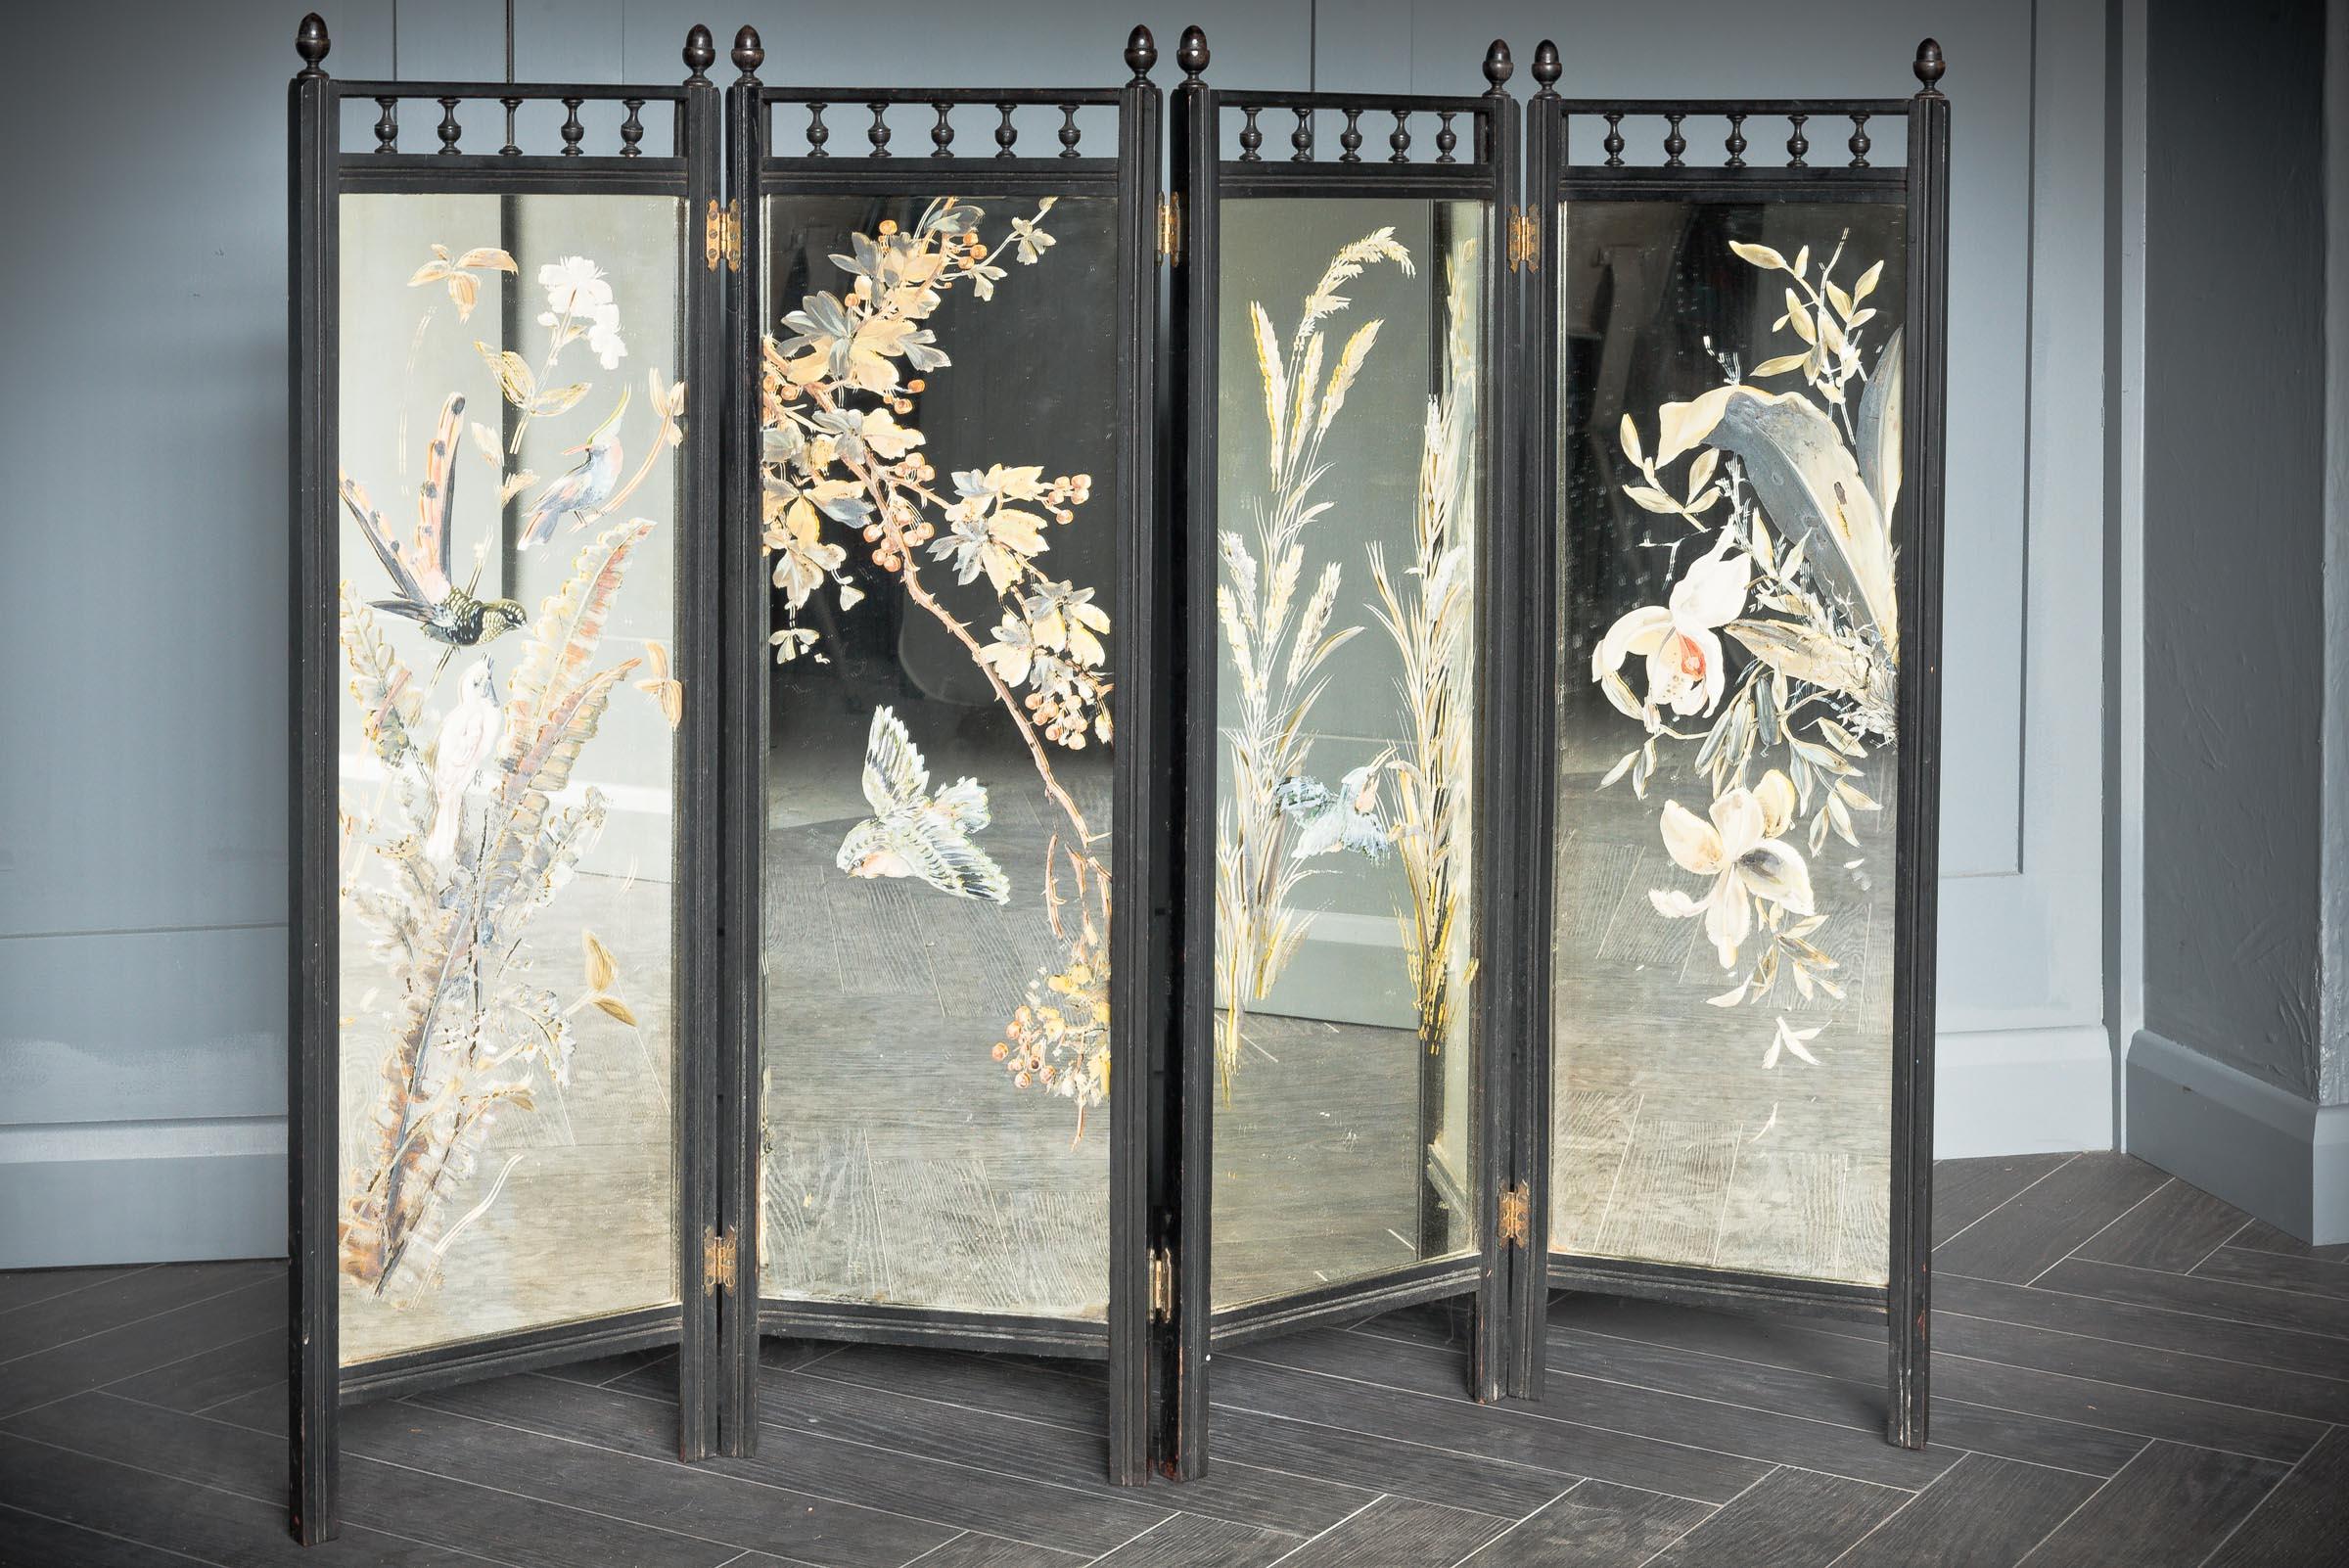 This stunning four part wooden mirror screen has a visually striking floral pattern accompanied by swooping birds hand painted onto the mirrored part of the screen. The design is typical of Victorian England. The wood has been washed with black dye